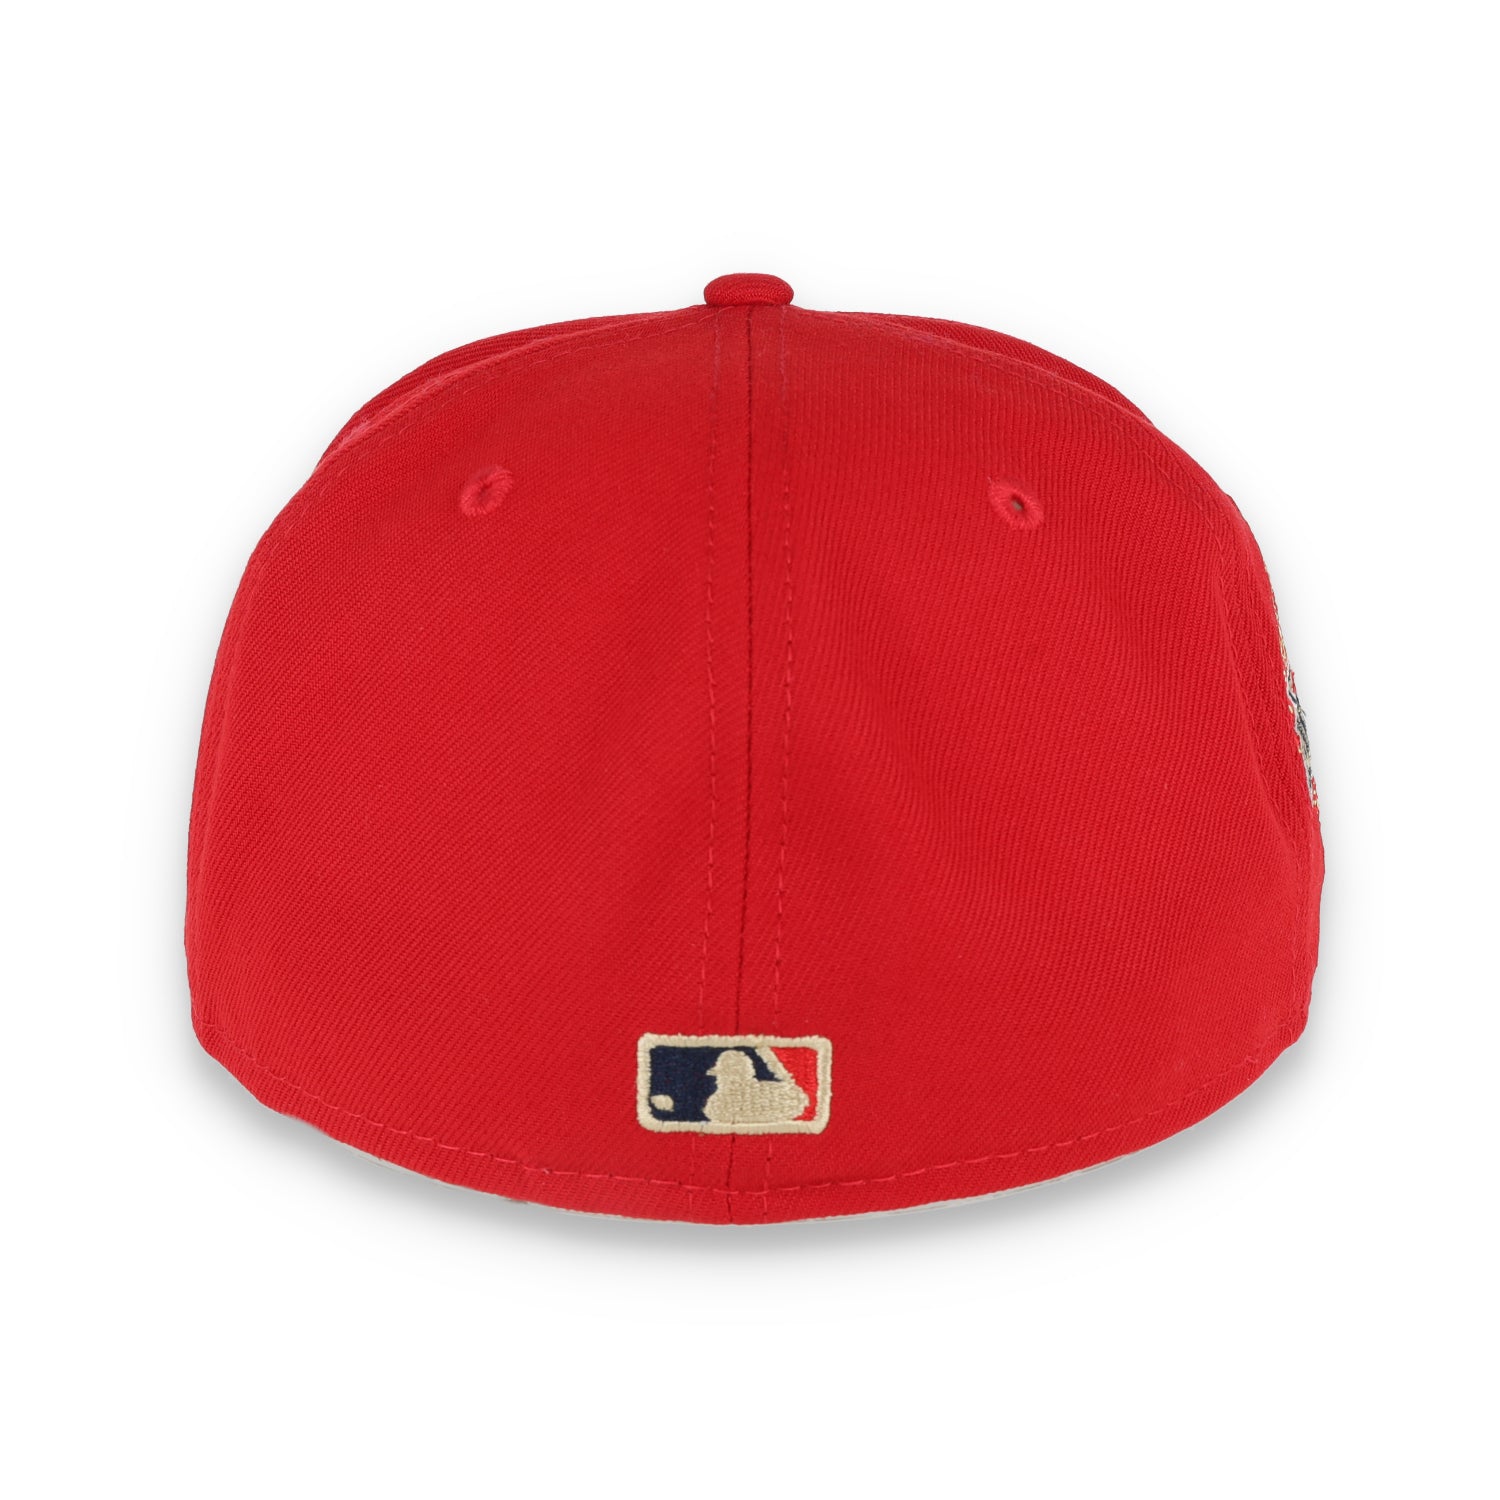 New Era Anaheim Angels Laurel All Star Game 2010 Side Patch 59fifty Fitted Cap-Red